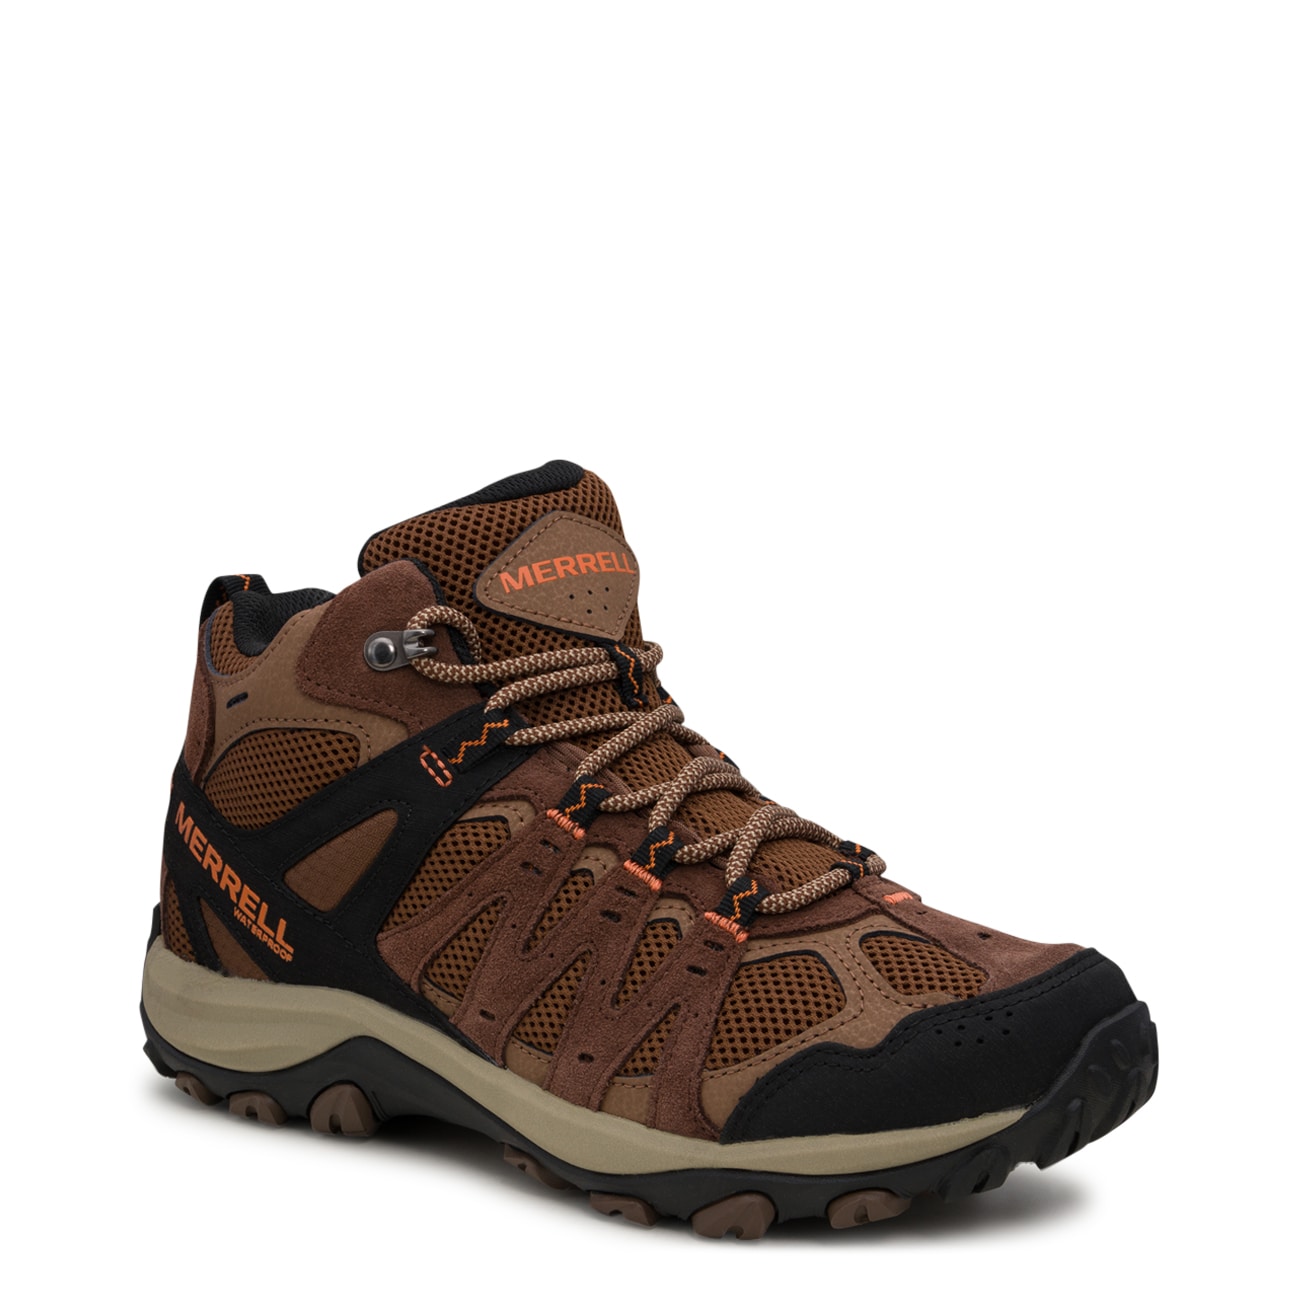 Men's Accentor 3 Mid Hiking Boot